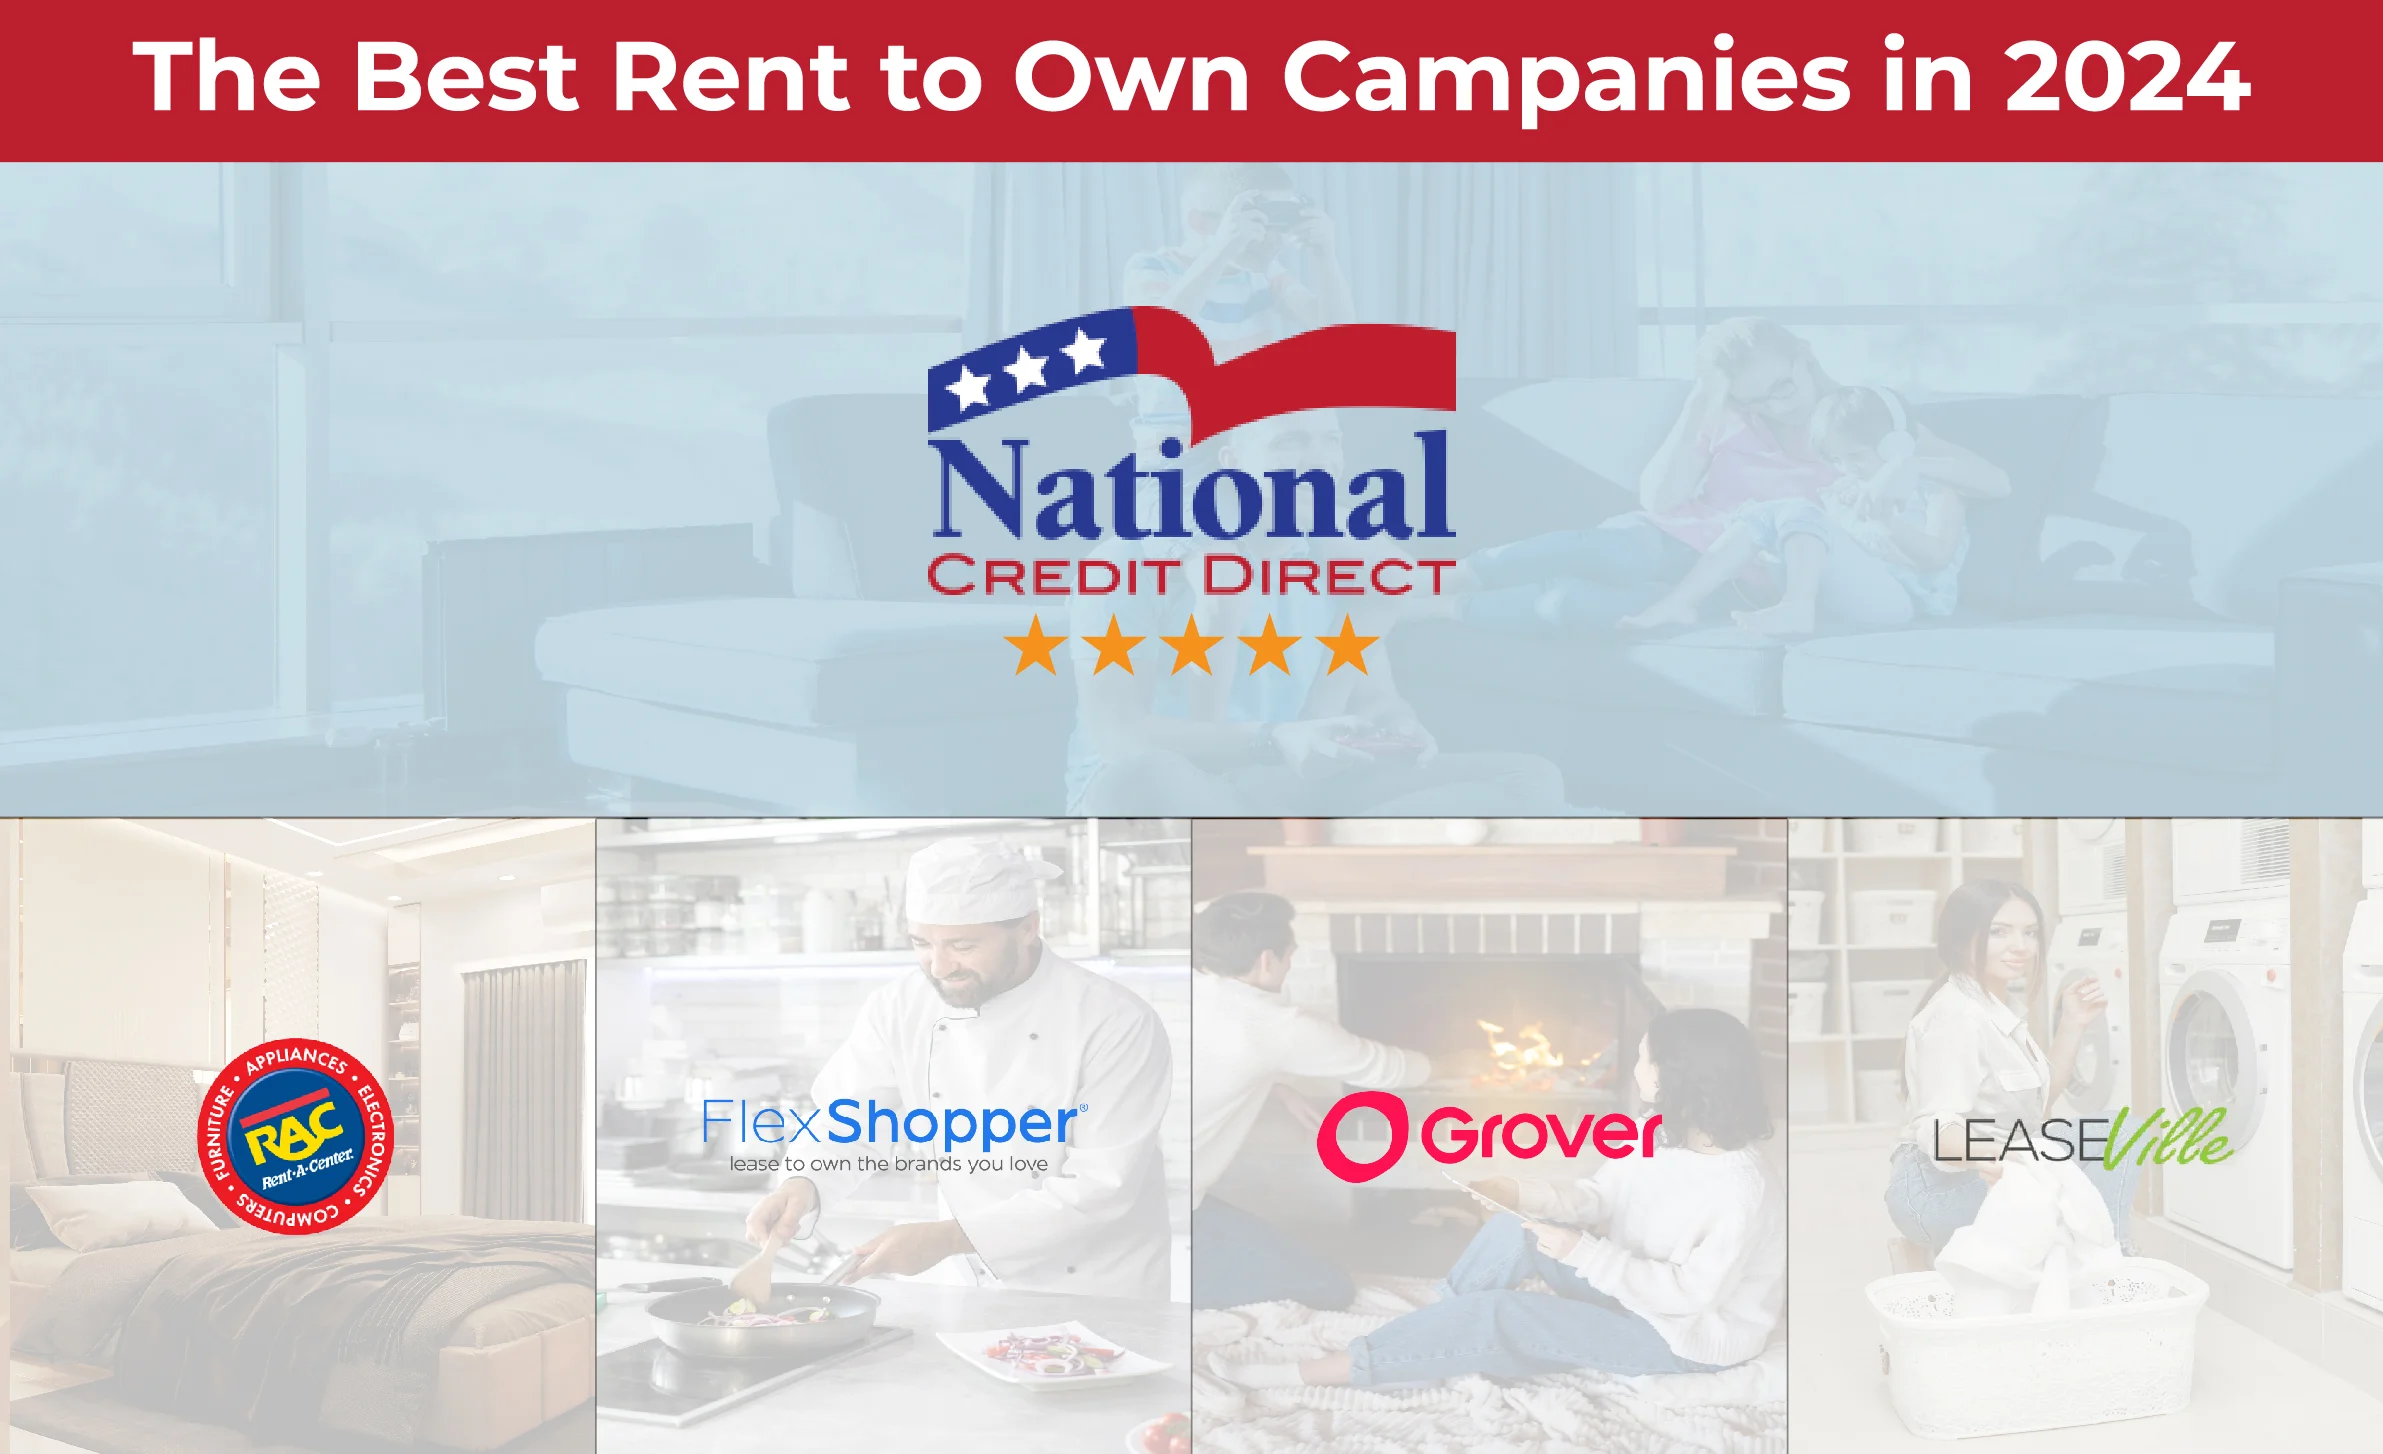 The Best Rent to Own Companies in 2024